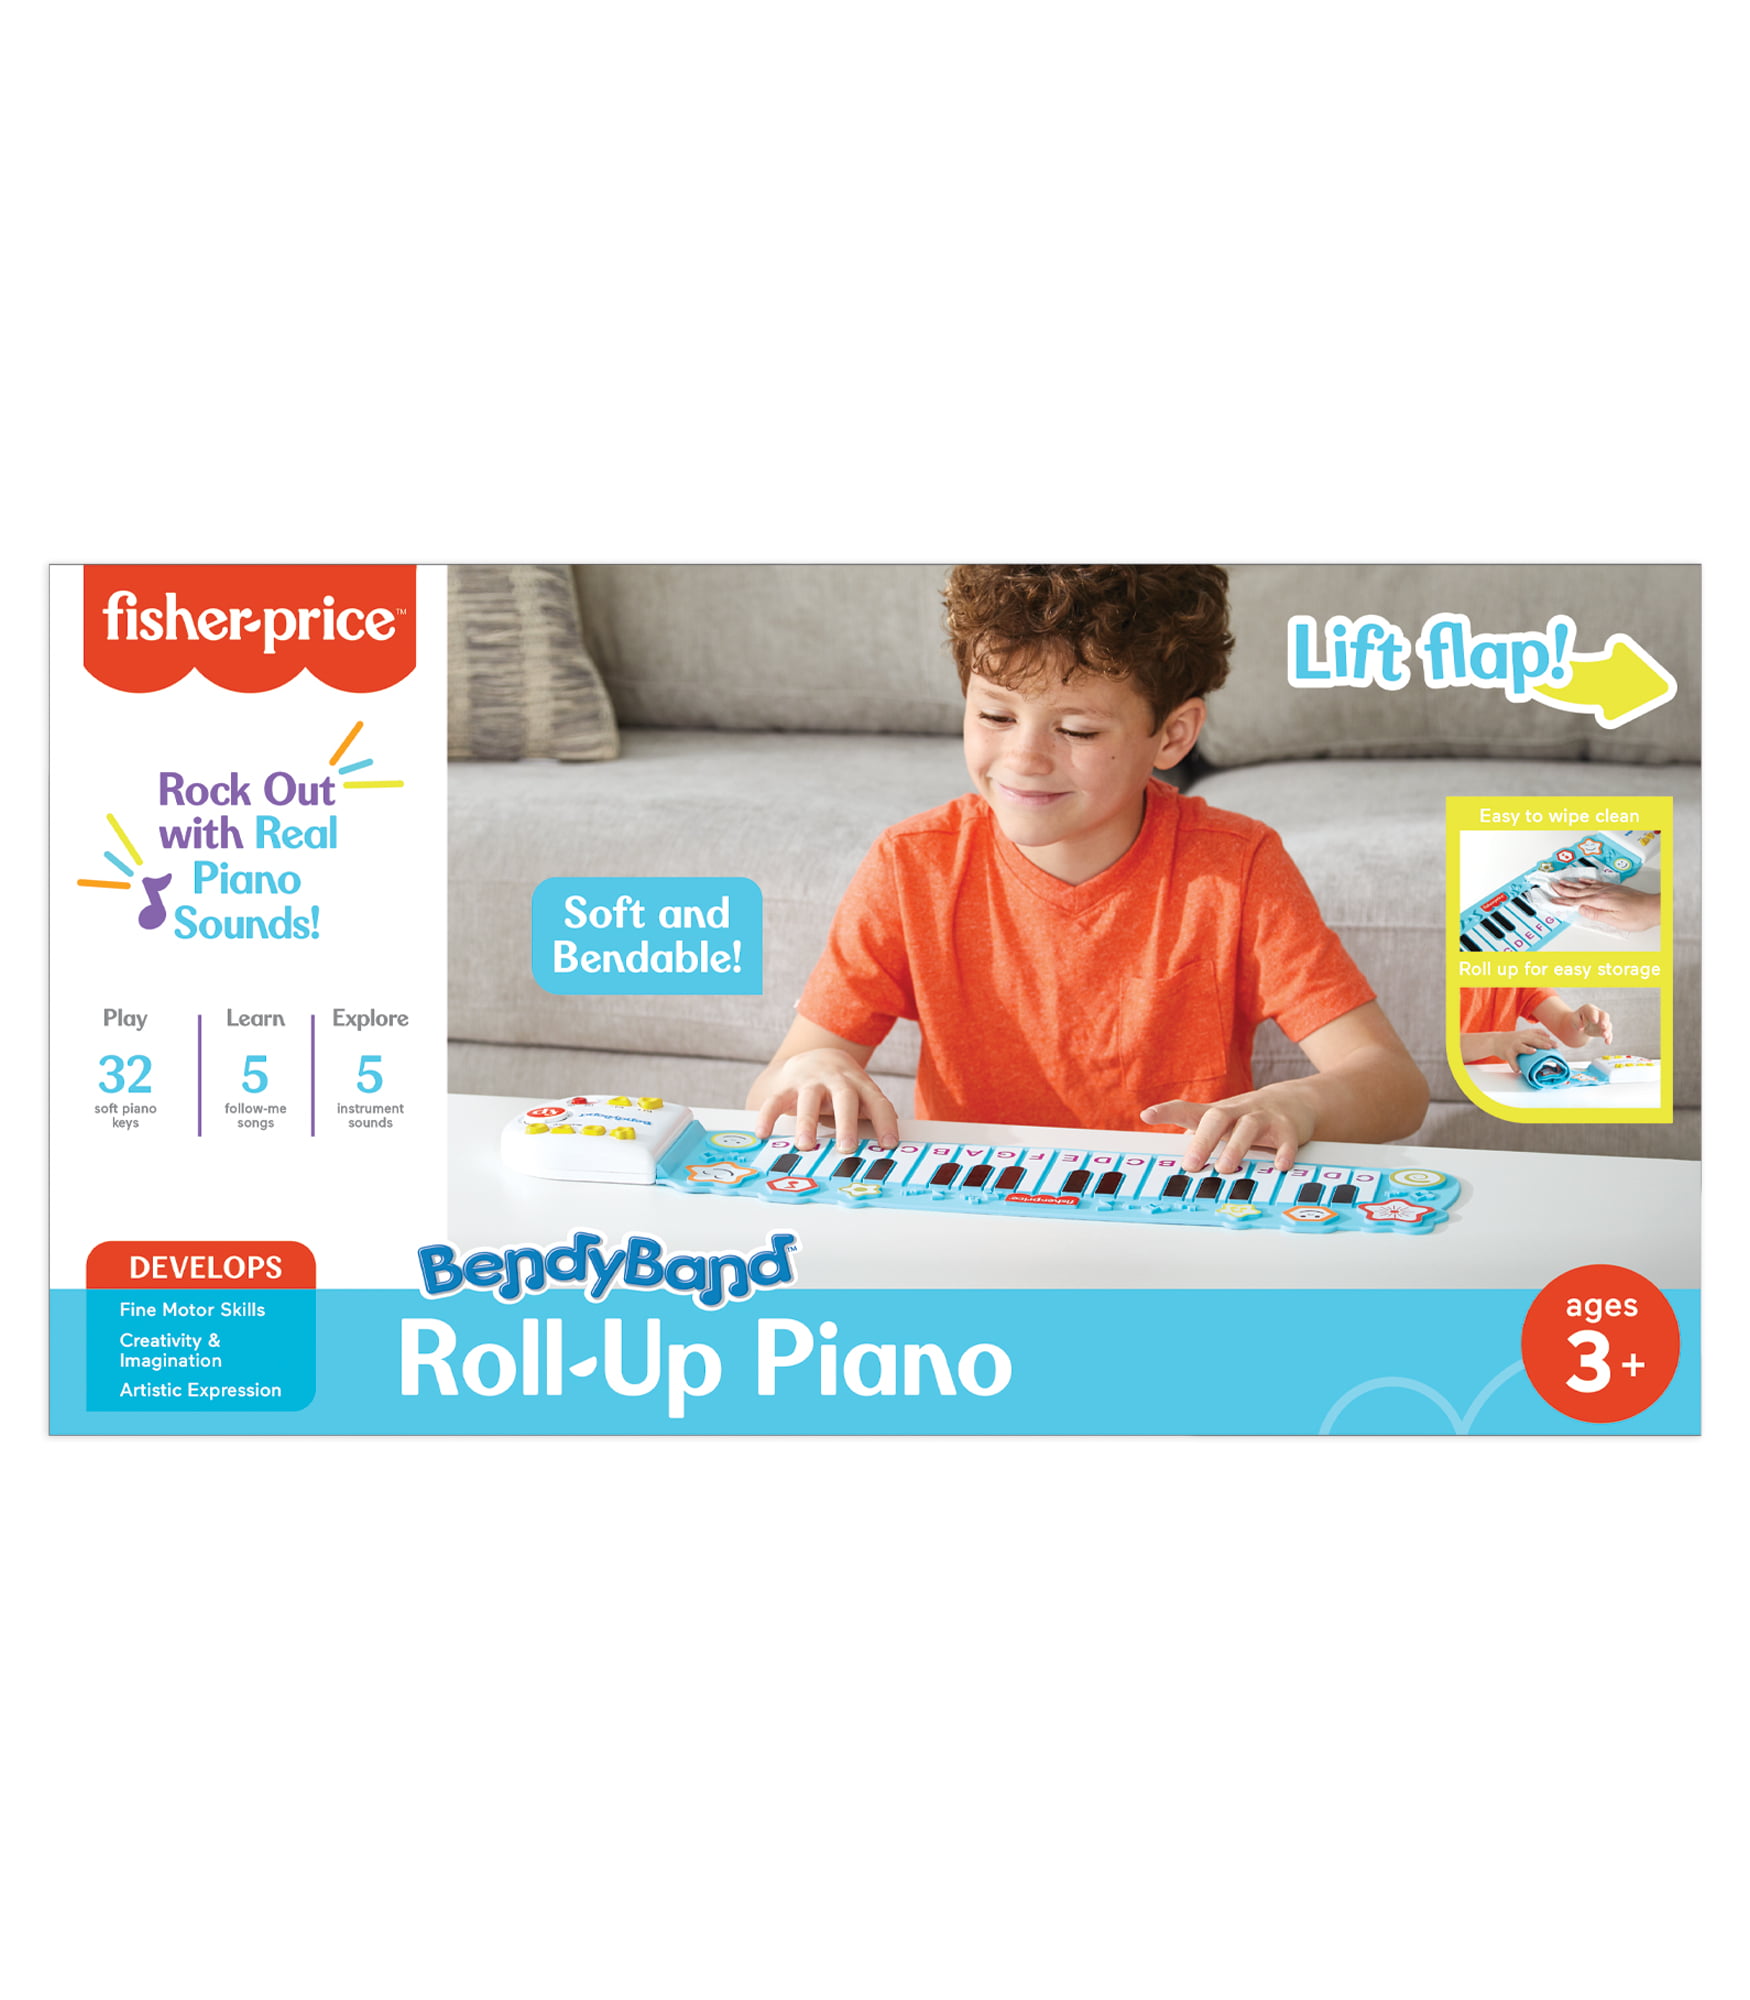 32 Soft Piano Keys Ages 3+ Fisher-Price BendyBand Roll-Up Piano—Electric Piano Keyboard for Kids 5 Songs Musical Toys for Toddlers Follow-Me Mode 